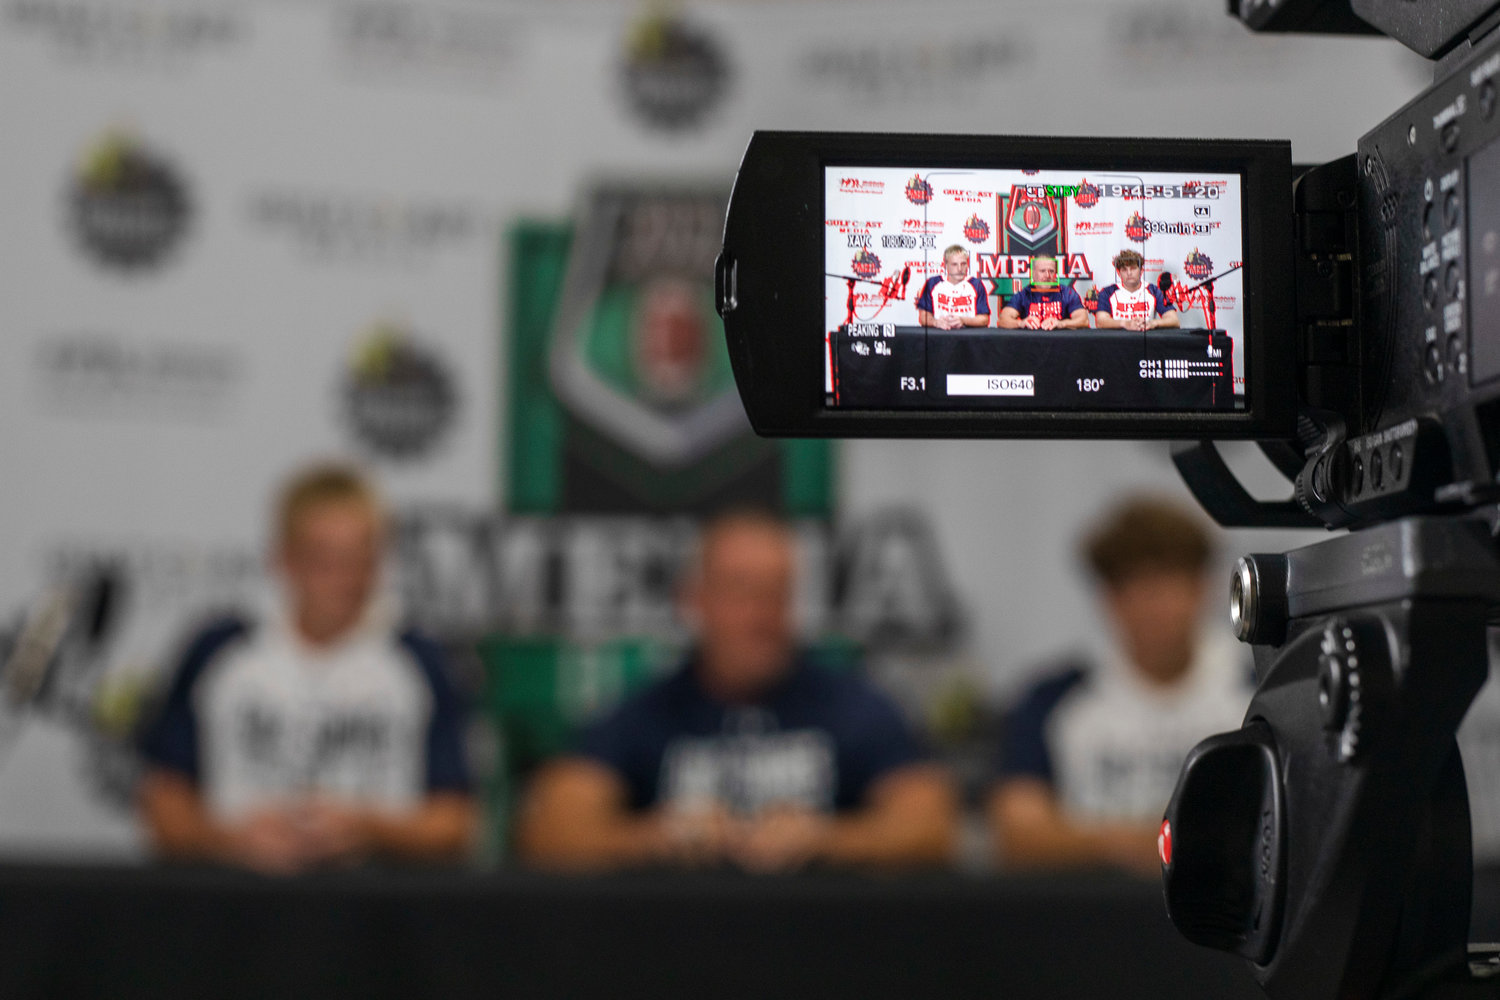 The Gulf Shores Dolphins, including quarterback Brendon Byrd, head coach Mark Hudspeth and lineman Tyler Schepker, were one of the local teams represented at the inaugural Gulf Coast Media Day at the Event Center at The Wharf Tuesday afternoon.